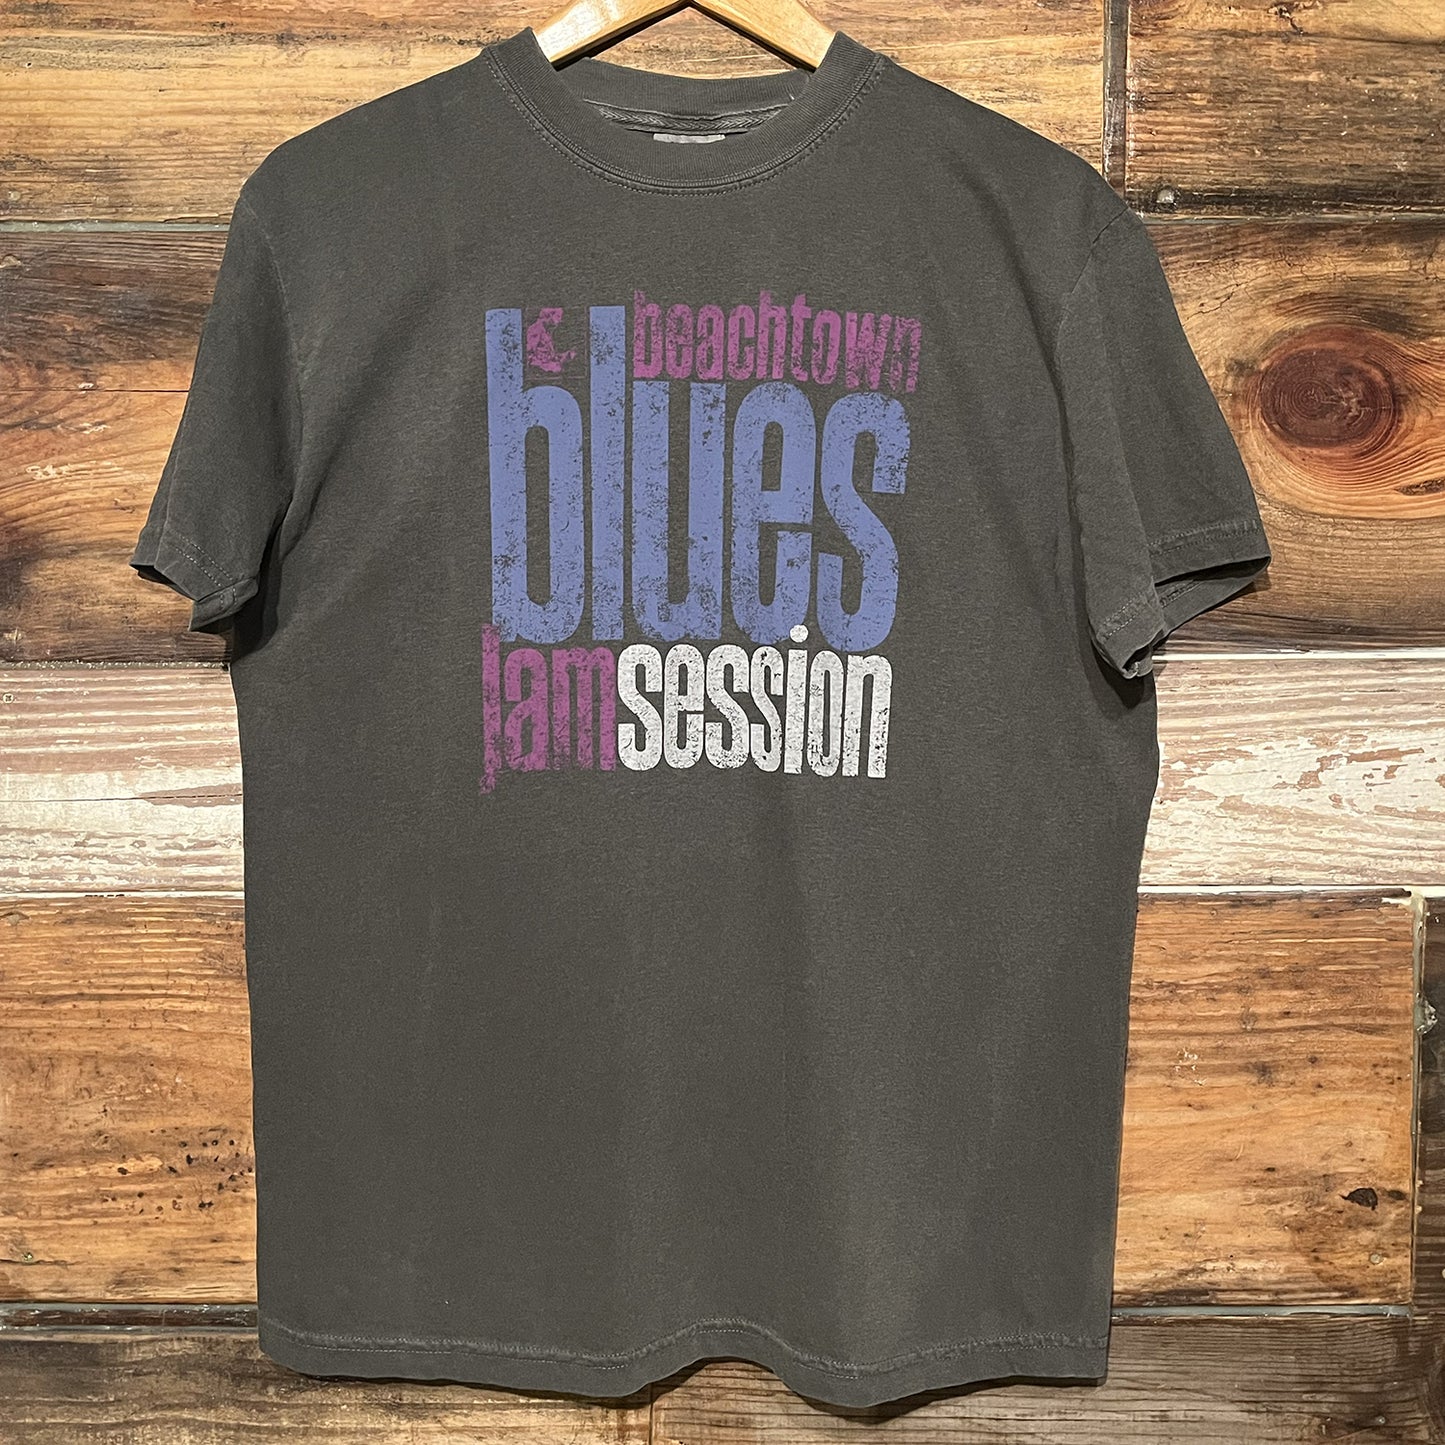 BEACHTOWN BLUES JAM SESSION S/S Tshirts - PEPPER